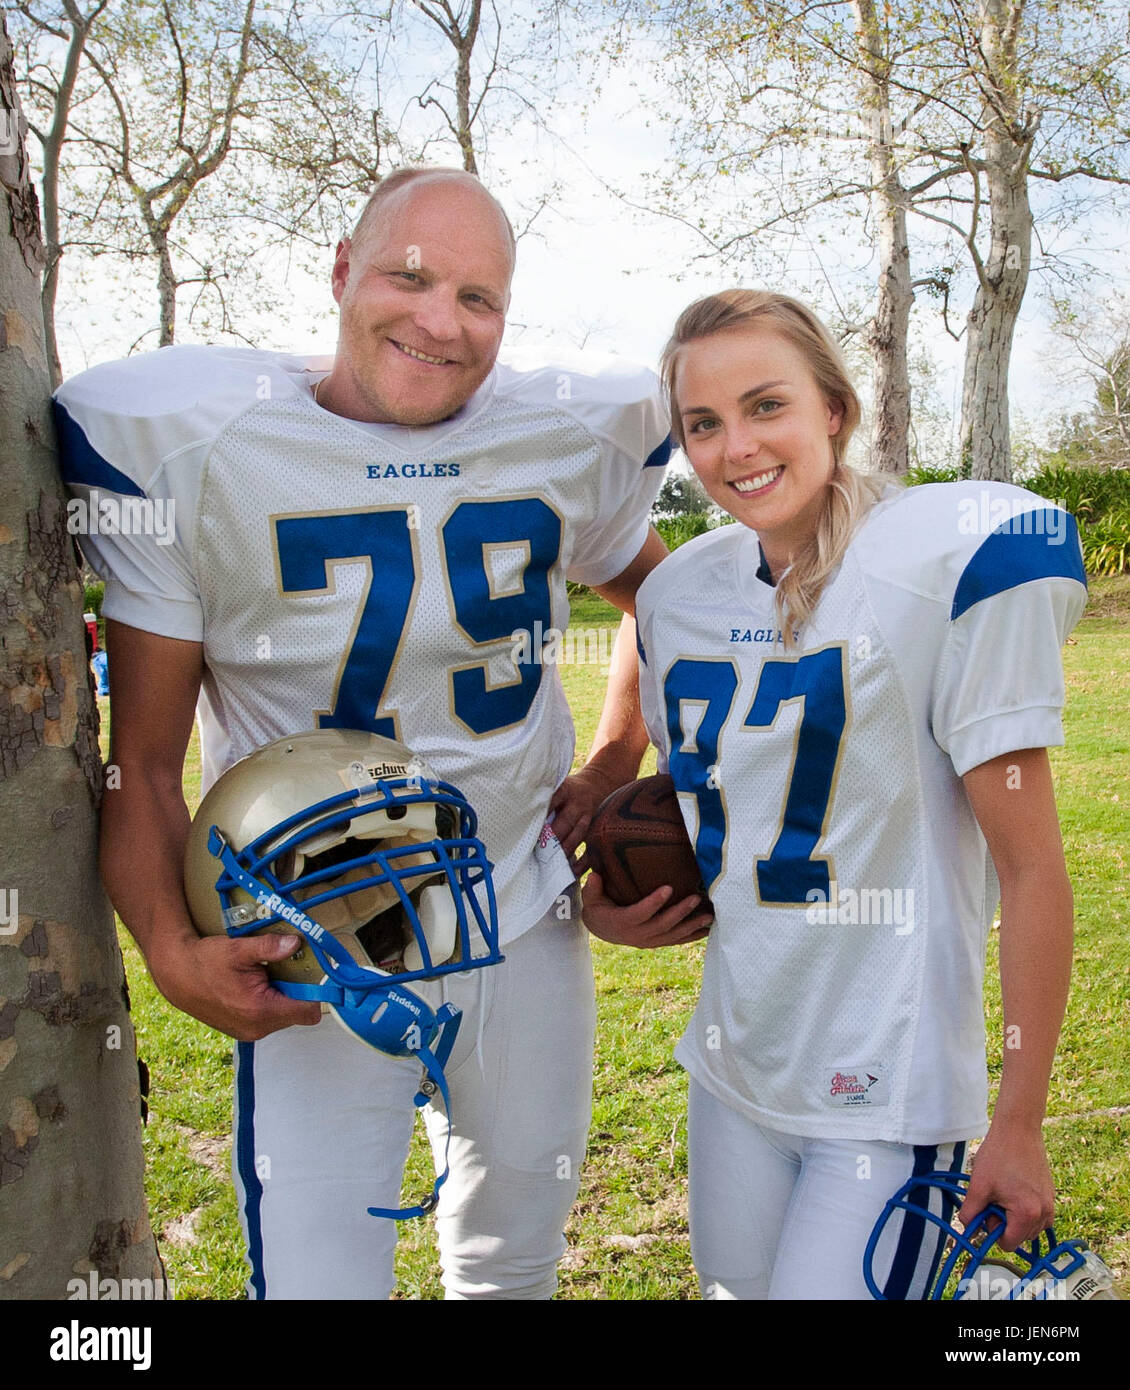 Coto De Caza, California, USA. 14th Feb, 2016. KALLE PALANDER and KIIRA KORPI take time out from a game of American football for a photo at the home of Teemu Selanne in Coto de Caza, California. Retired Anaheim Ducks Wing Teemu Selanne met with friends from Finland on Sunday at his home. Credit: David Bro/ZUMA Wire/ZUMAPRESS.com/Alamy Live News Stock Photo